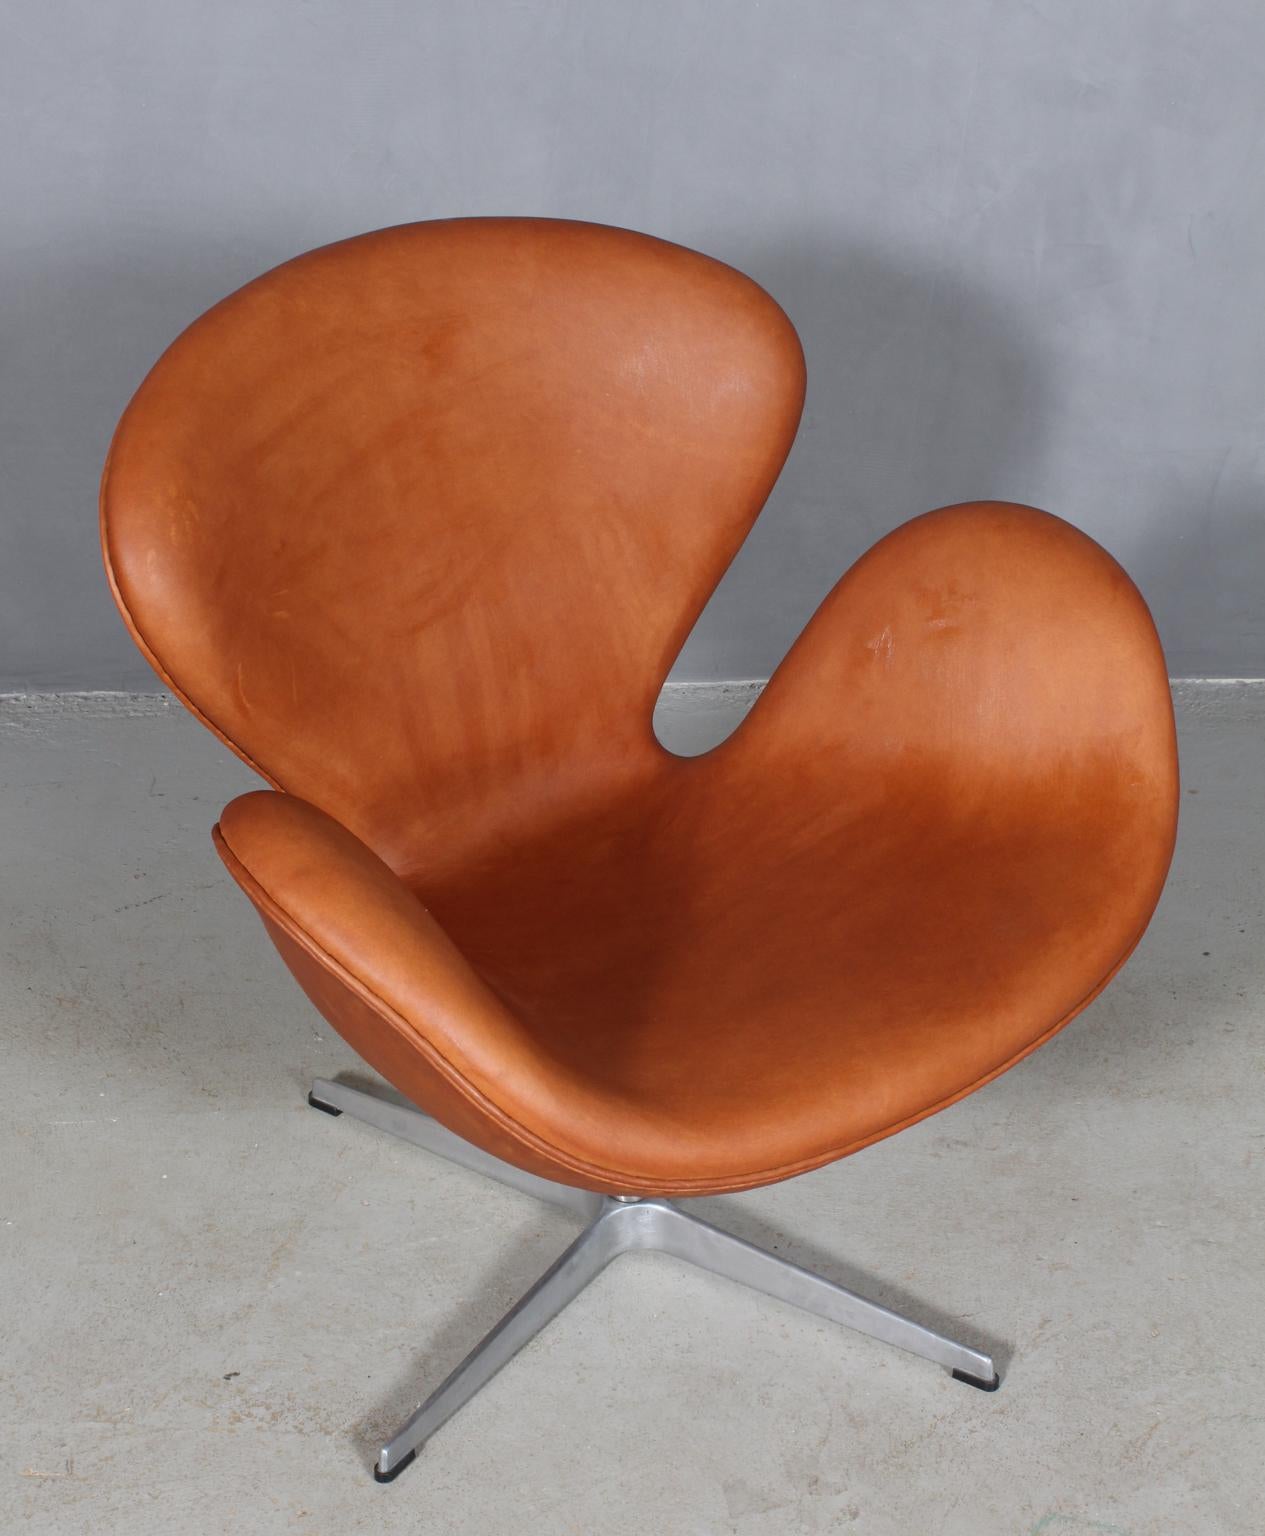 The swan chair, new upholstered in cognac aniline leather. 

Fritz Hansen. 1981. 

Upholstered in Denmark in 2019 with aniline leather. 

This iconic chair is one of the most famous chairs in the world and is recognized by design lovers in all